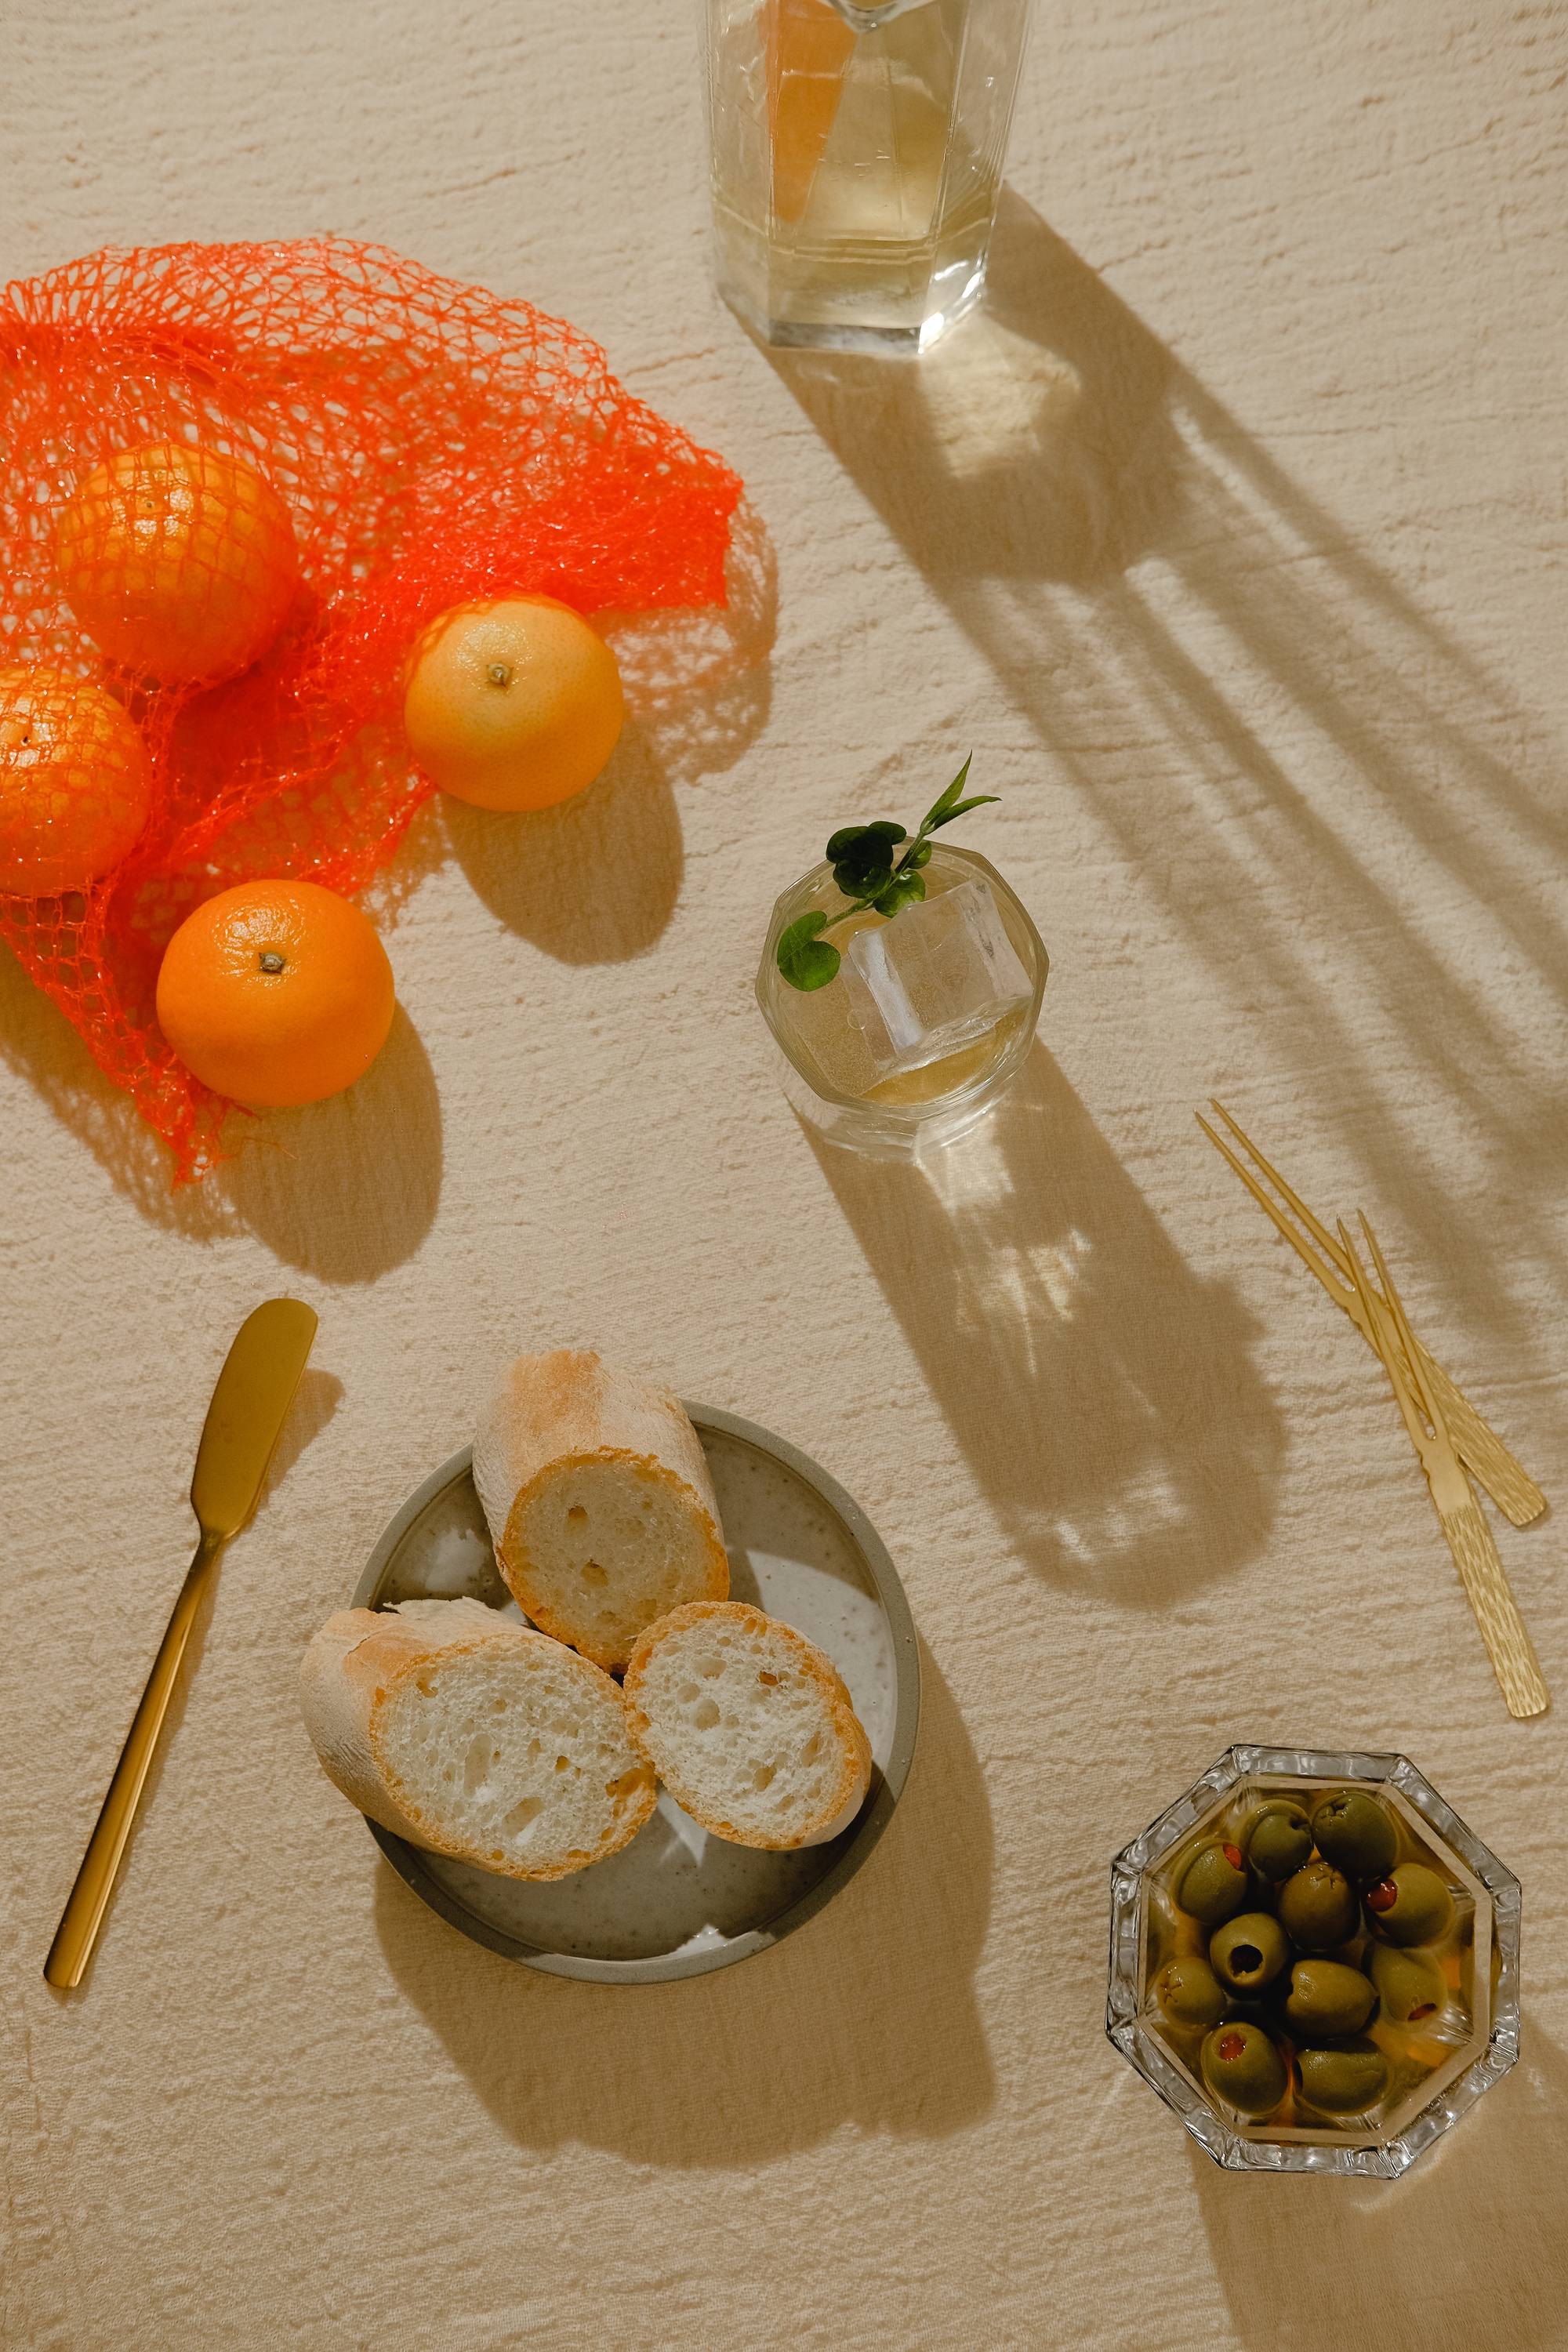 Top View of Drinks, Fruits, Bread and Olives